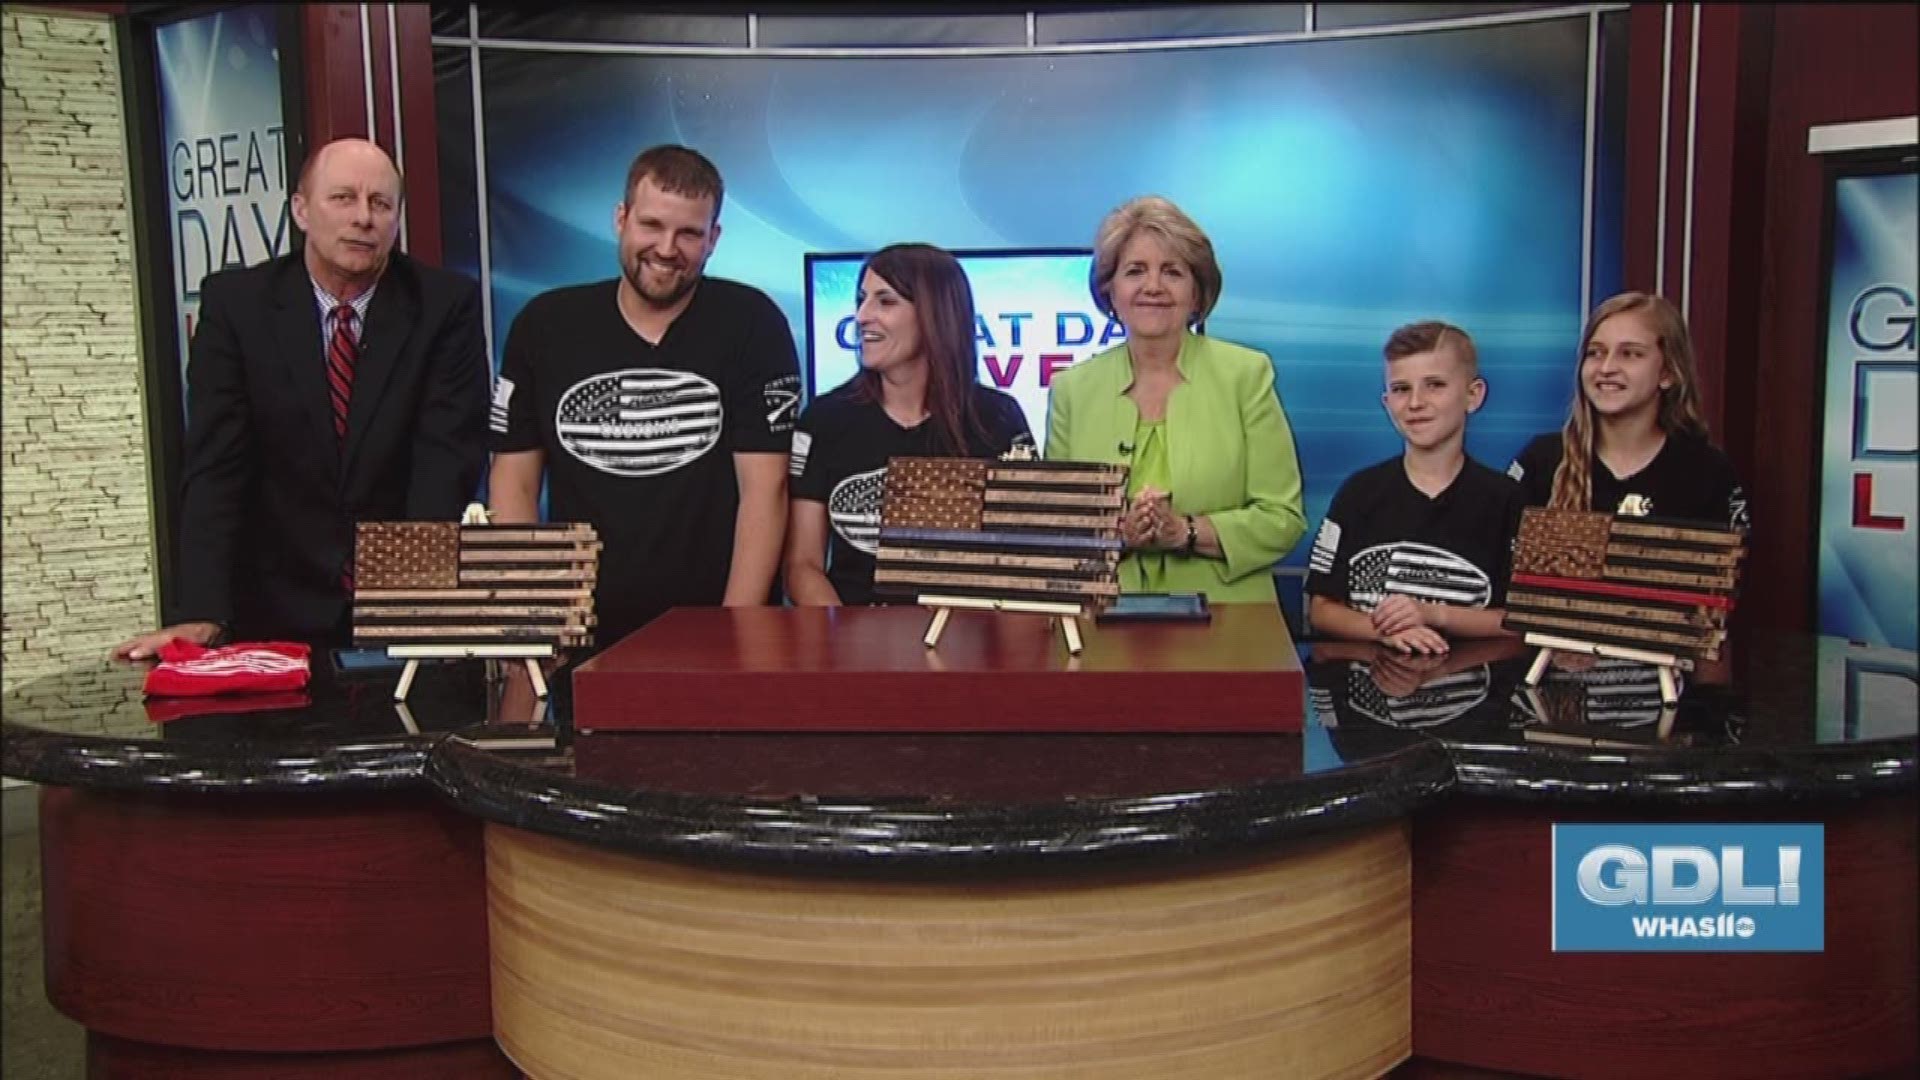 Veteran Chris Cruise and his family joins us in the Great Day Live studio to show off their handcrafted American flags made from bourbon barrels. In addition to making patriotic products, the family-owned business also provides a supportive workplace and 